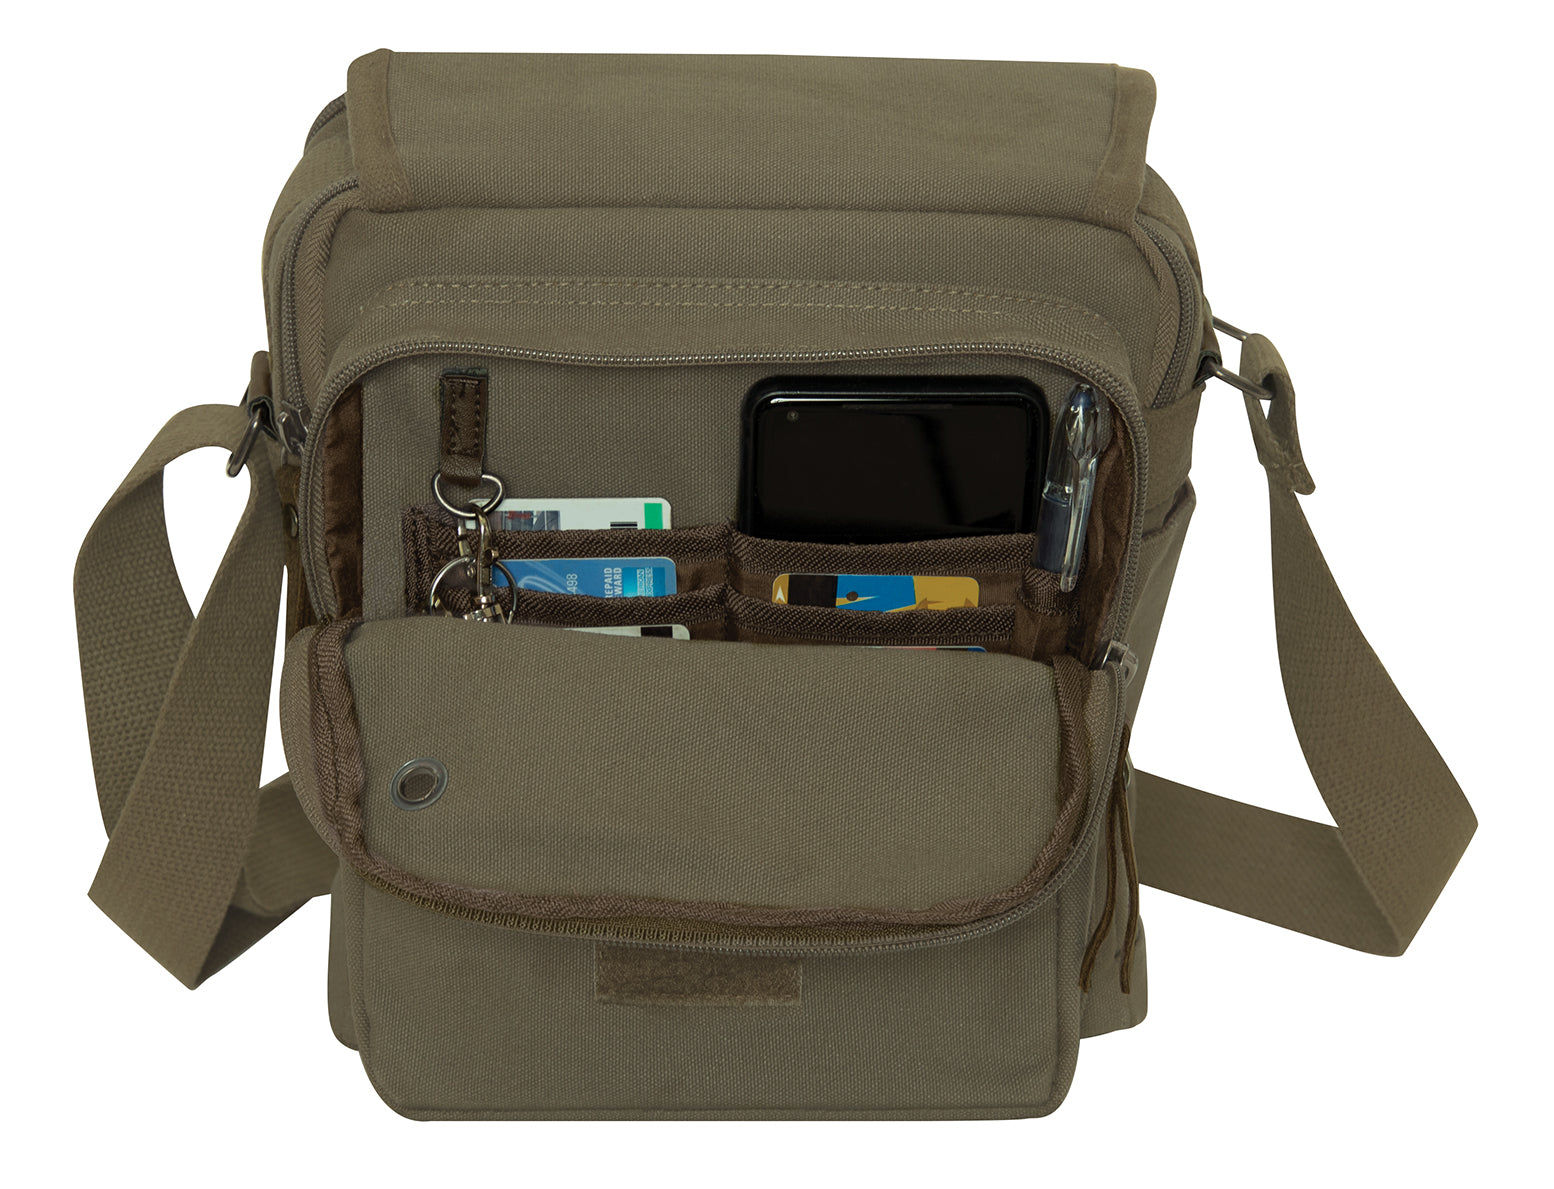 Rothco Every Day Work Shoulder Bag - Tactical Choice Plus